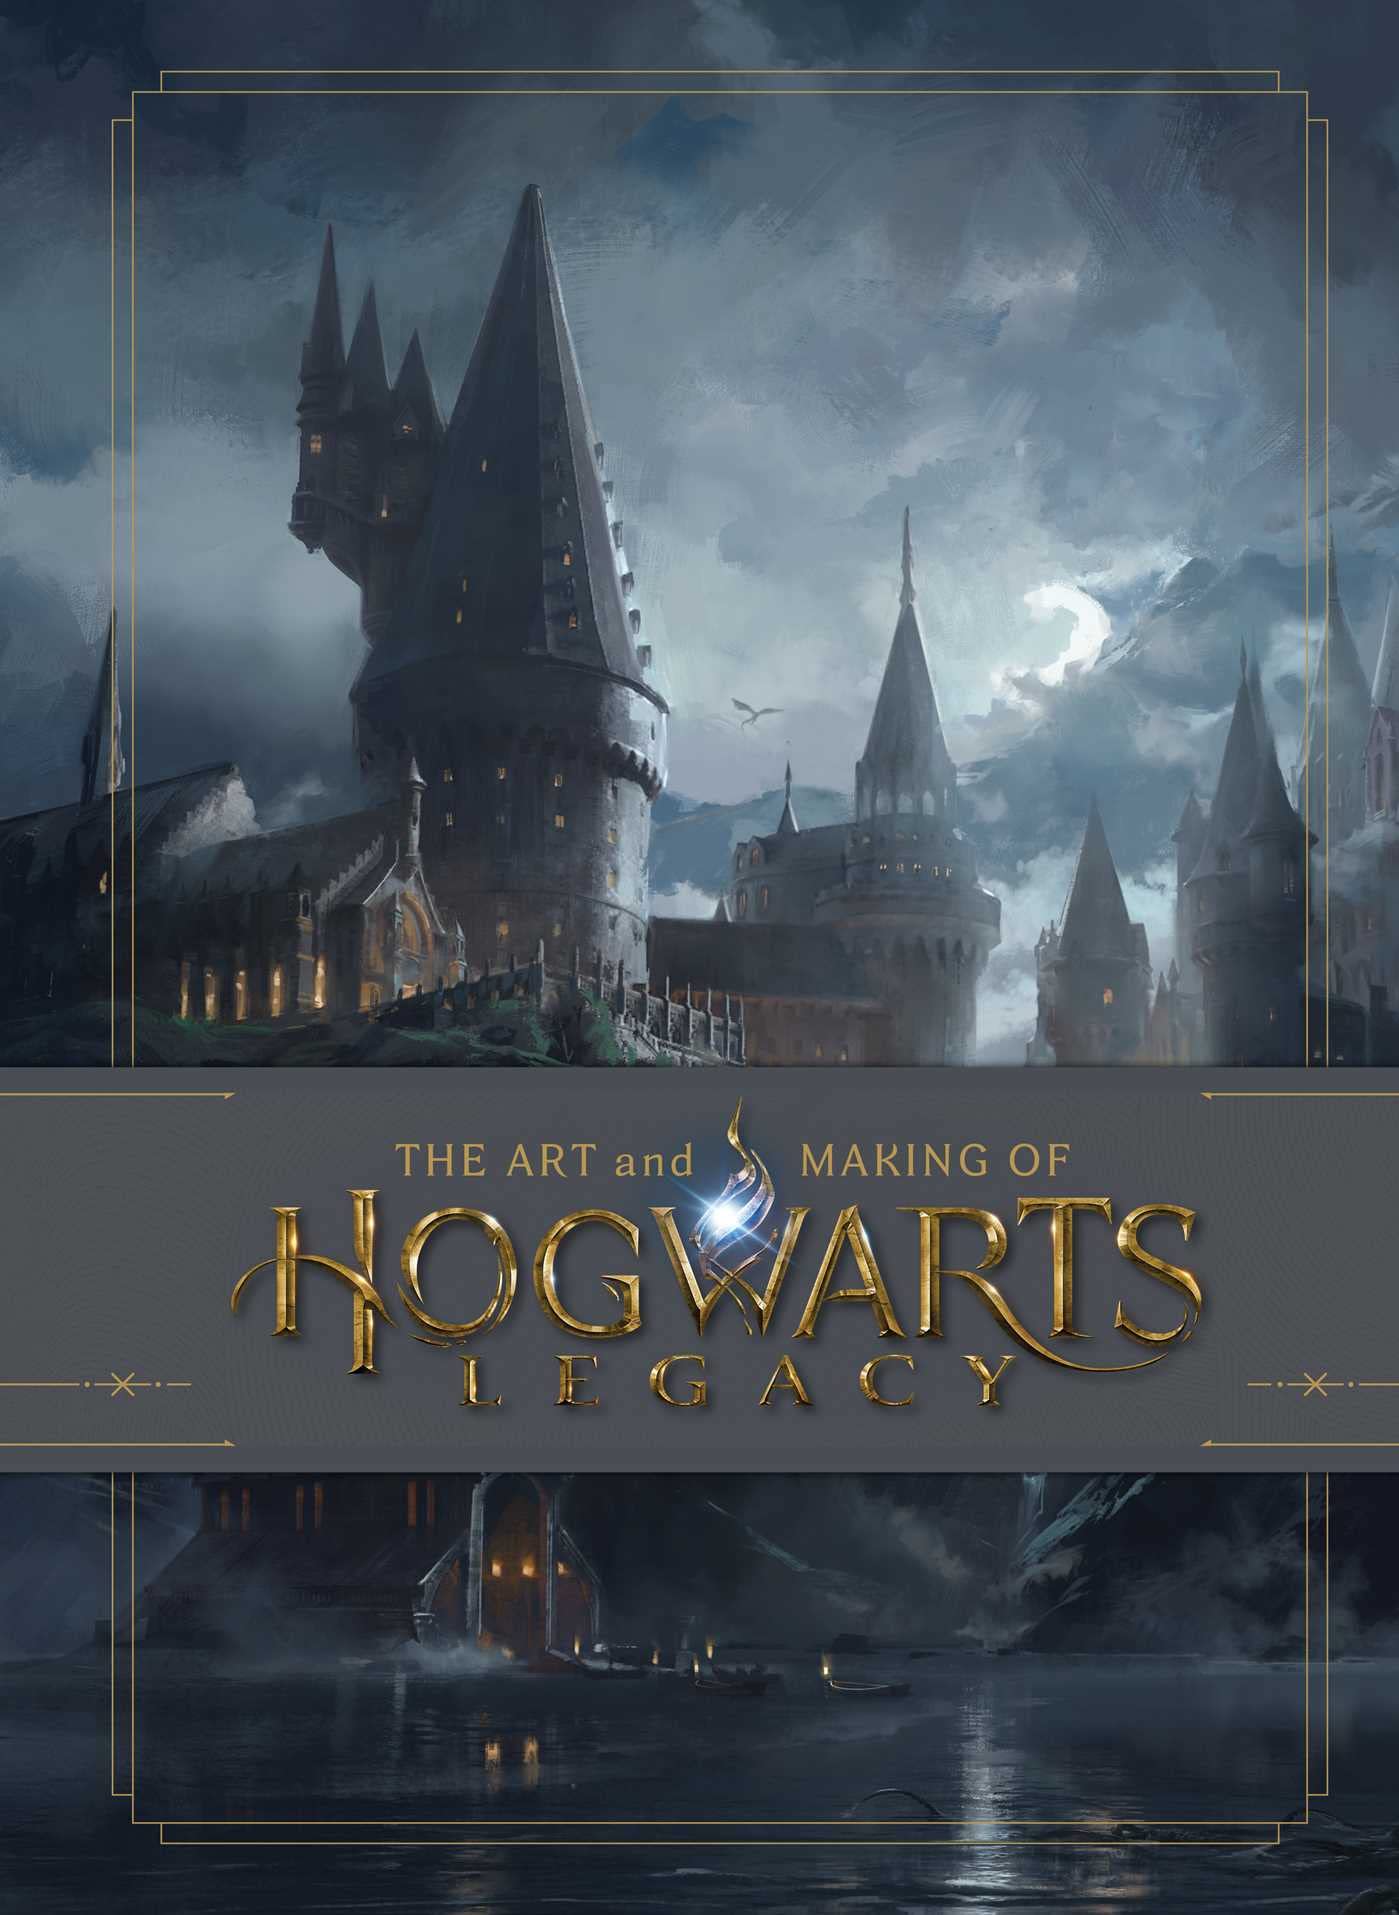 Hogwarts Legacy gameplay captures the magic of the books